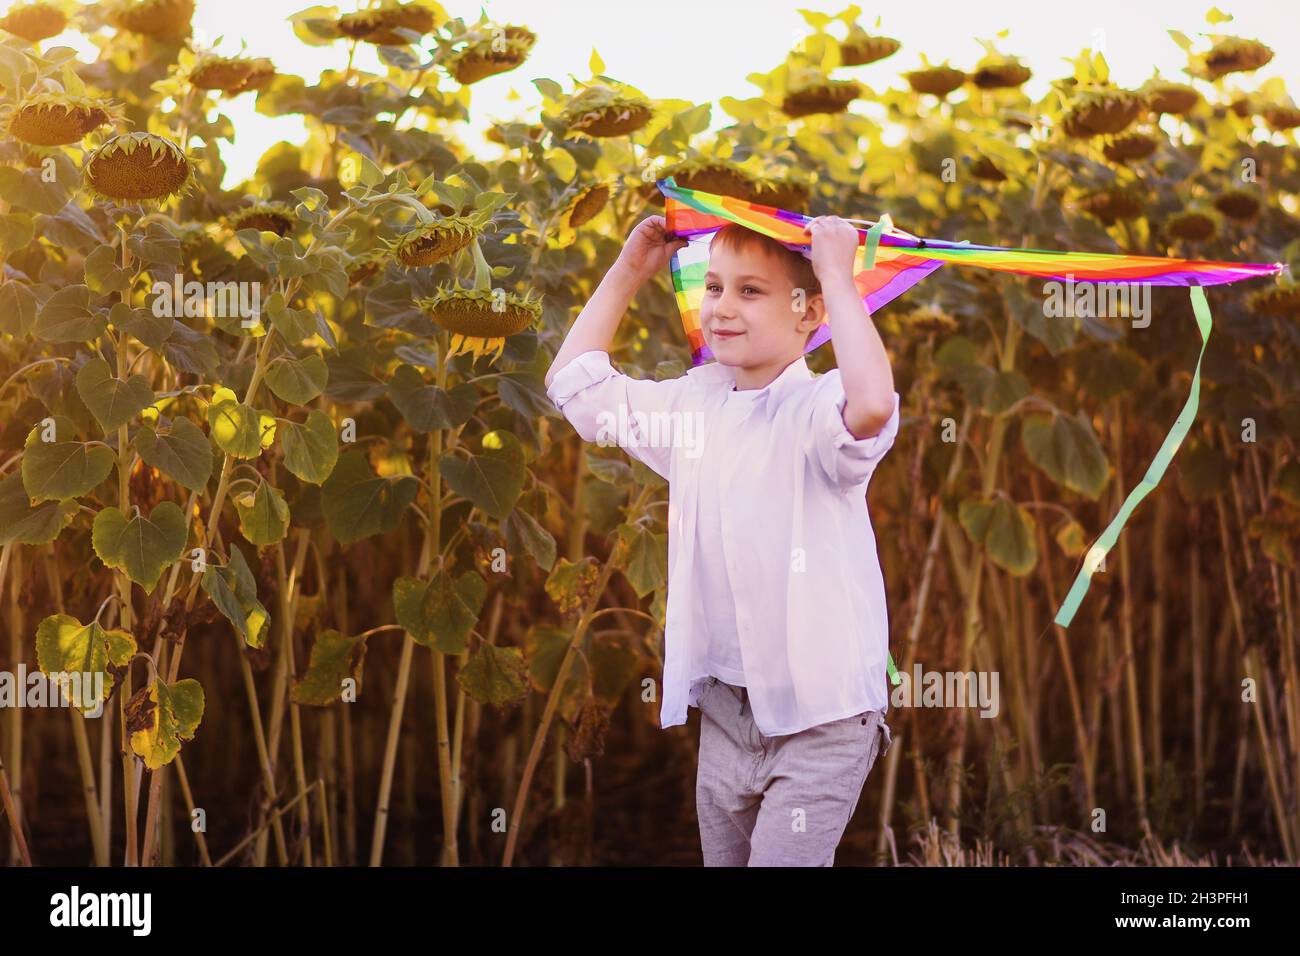 A kite in the hands of a boy on the background of sunflowers. Stock Photo